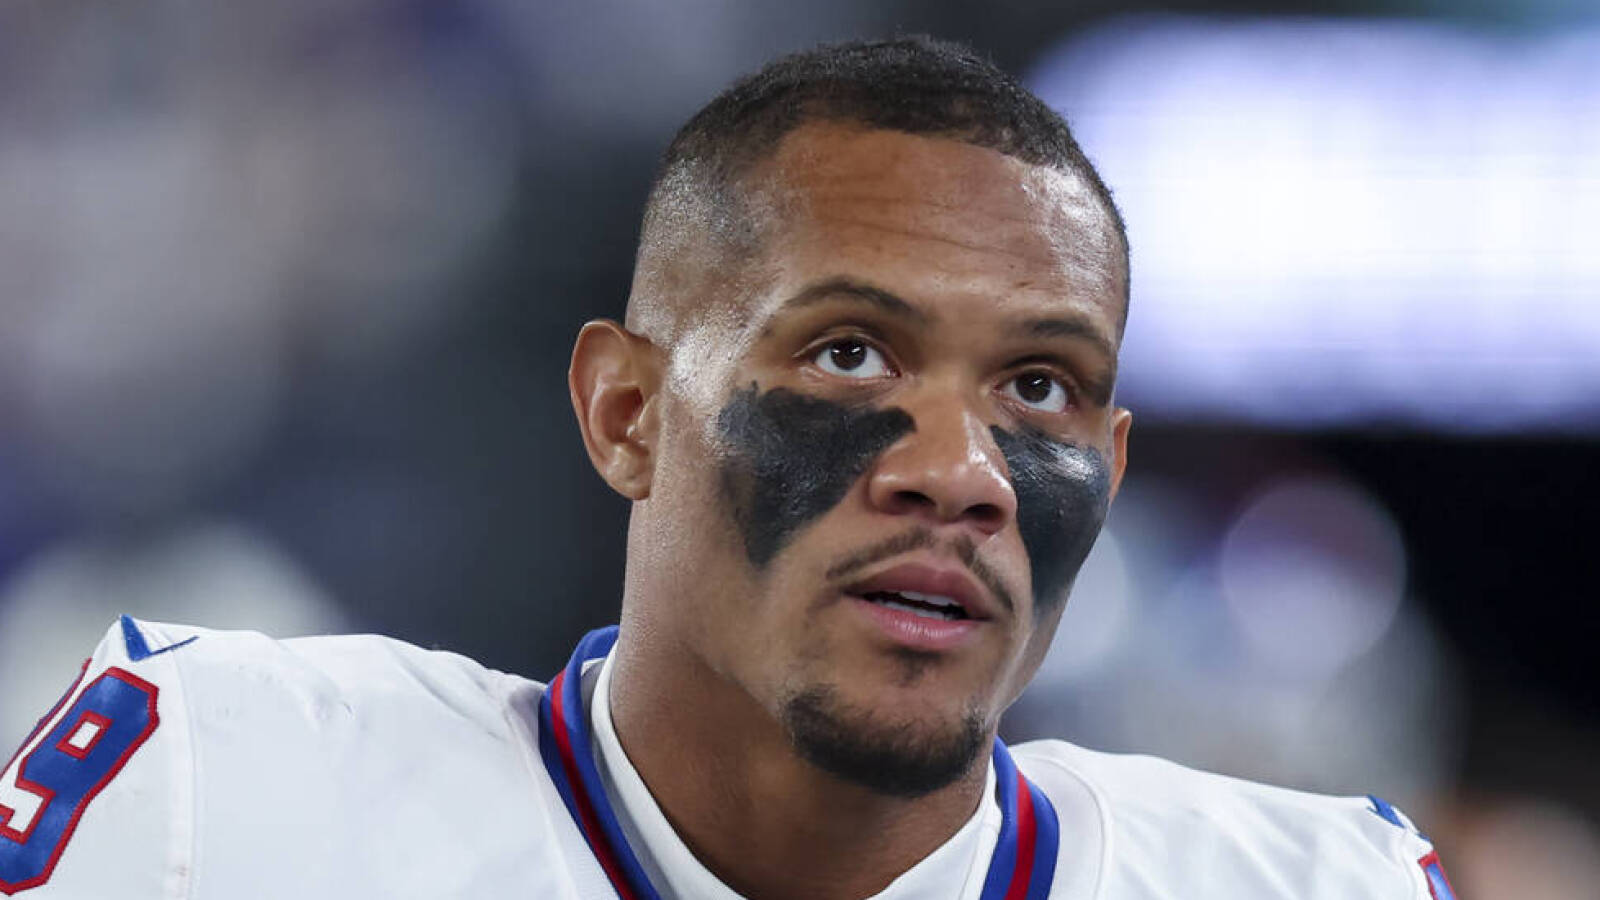 Giants’ Kenny Golladay ‘real excited’ to contribute after knee injury